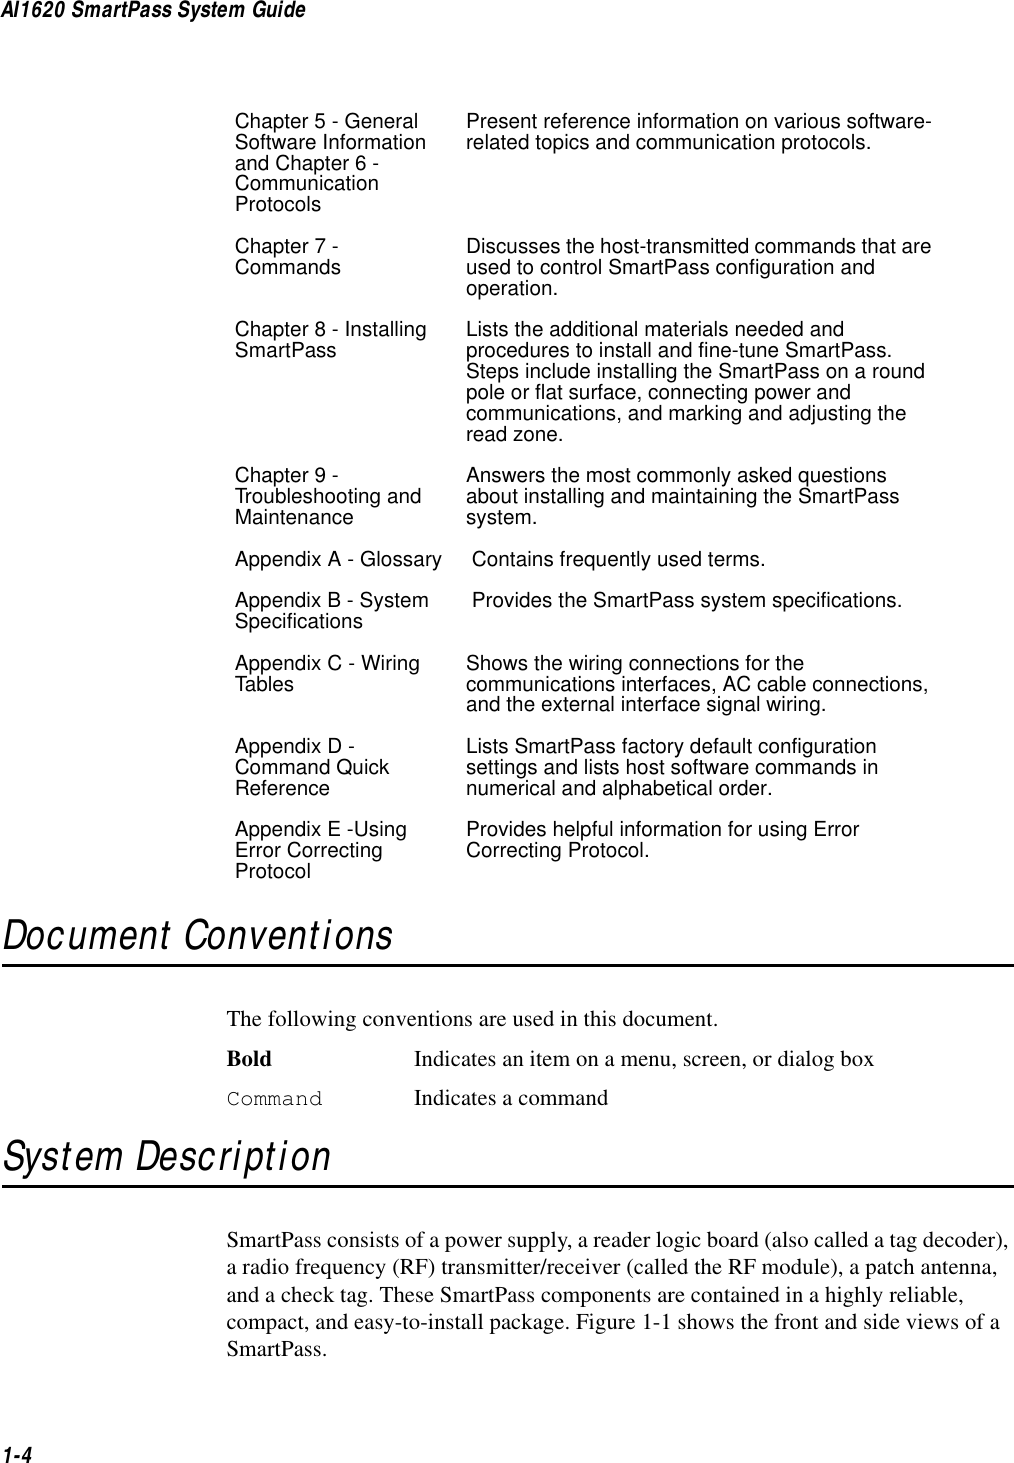 AI1620 SmartPass System Guide1-4Document ConventionsThe following conventions are used in this document.Bold Indicates an item on a menu, screen, or dialog boxCommand Indicates a commandSystem DescriptionSmartPass consists of a power supply, a reader logic board (also called a tag decoder), a radio frequency (RF) transmitter/receiver (called the RF module), a patch antenna, and a check tag. These SmartPass components are contained in a highly reliable, compact, and easy-to-install package. Figure 1-1 shows the front and side views of a SmartPass.Chapter 5 - General Software Information and Chapter 6 - Communication ProtocolsPresent reference information on various software-related topics and communication protocols.Chapter 7 - Commands Discusses the host-transmitted commands that are used to control SmartPass configuration and operation.Chapter 8 - Installing SmartPass Lists the additional materials needed and procedures to install and fine-tune SmartPass. Steps include installing the SmartPass on a round pole or flat surface, connecting power and communications, and marking and adjusting the read zone.Chapter 9 - Troubleshooting and MaintenanceAnswers the most commonly asked questions about installing and maintaining the SmartPass system.Appendix A - Glossary  Contains frequently used terms.Appendix B - System Specifications  Provides the SmartPass system specifications.Appendix C - Wiring Tables Shows the wiring connections for the communications interfaces, AC cable connections, and the external interface signal wiring.Appendix D - Command Quick ReferenceLists SmartPass factory default configuration settings and lists host software commands in numerical and alphabetical order.Appendix E -Using Error Correcting ProtocolProvides helpful information for using Error Correcting Protocol.